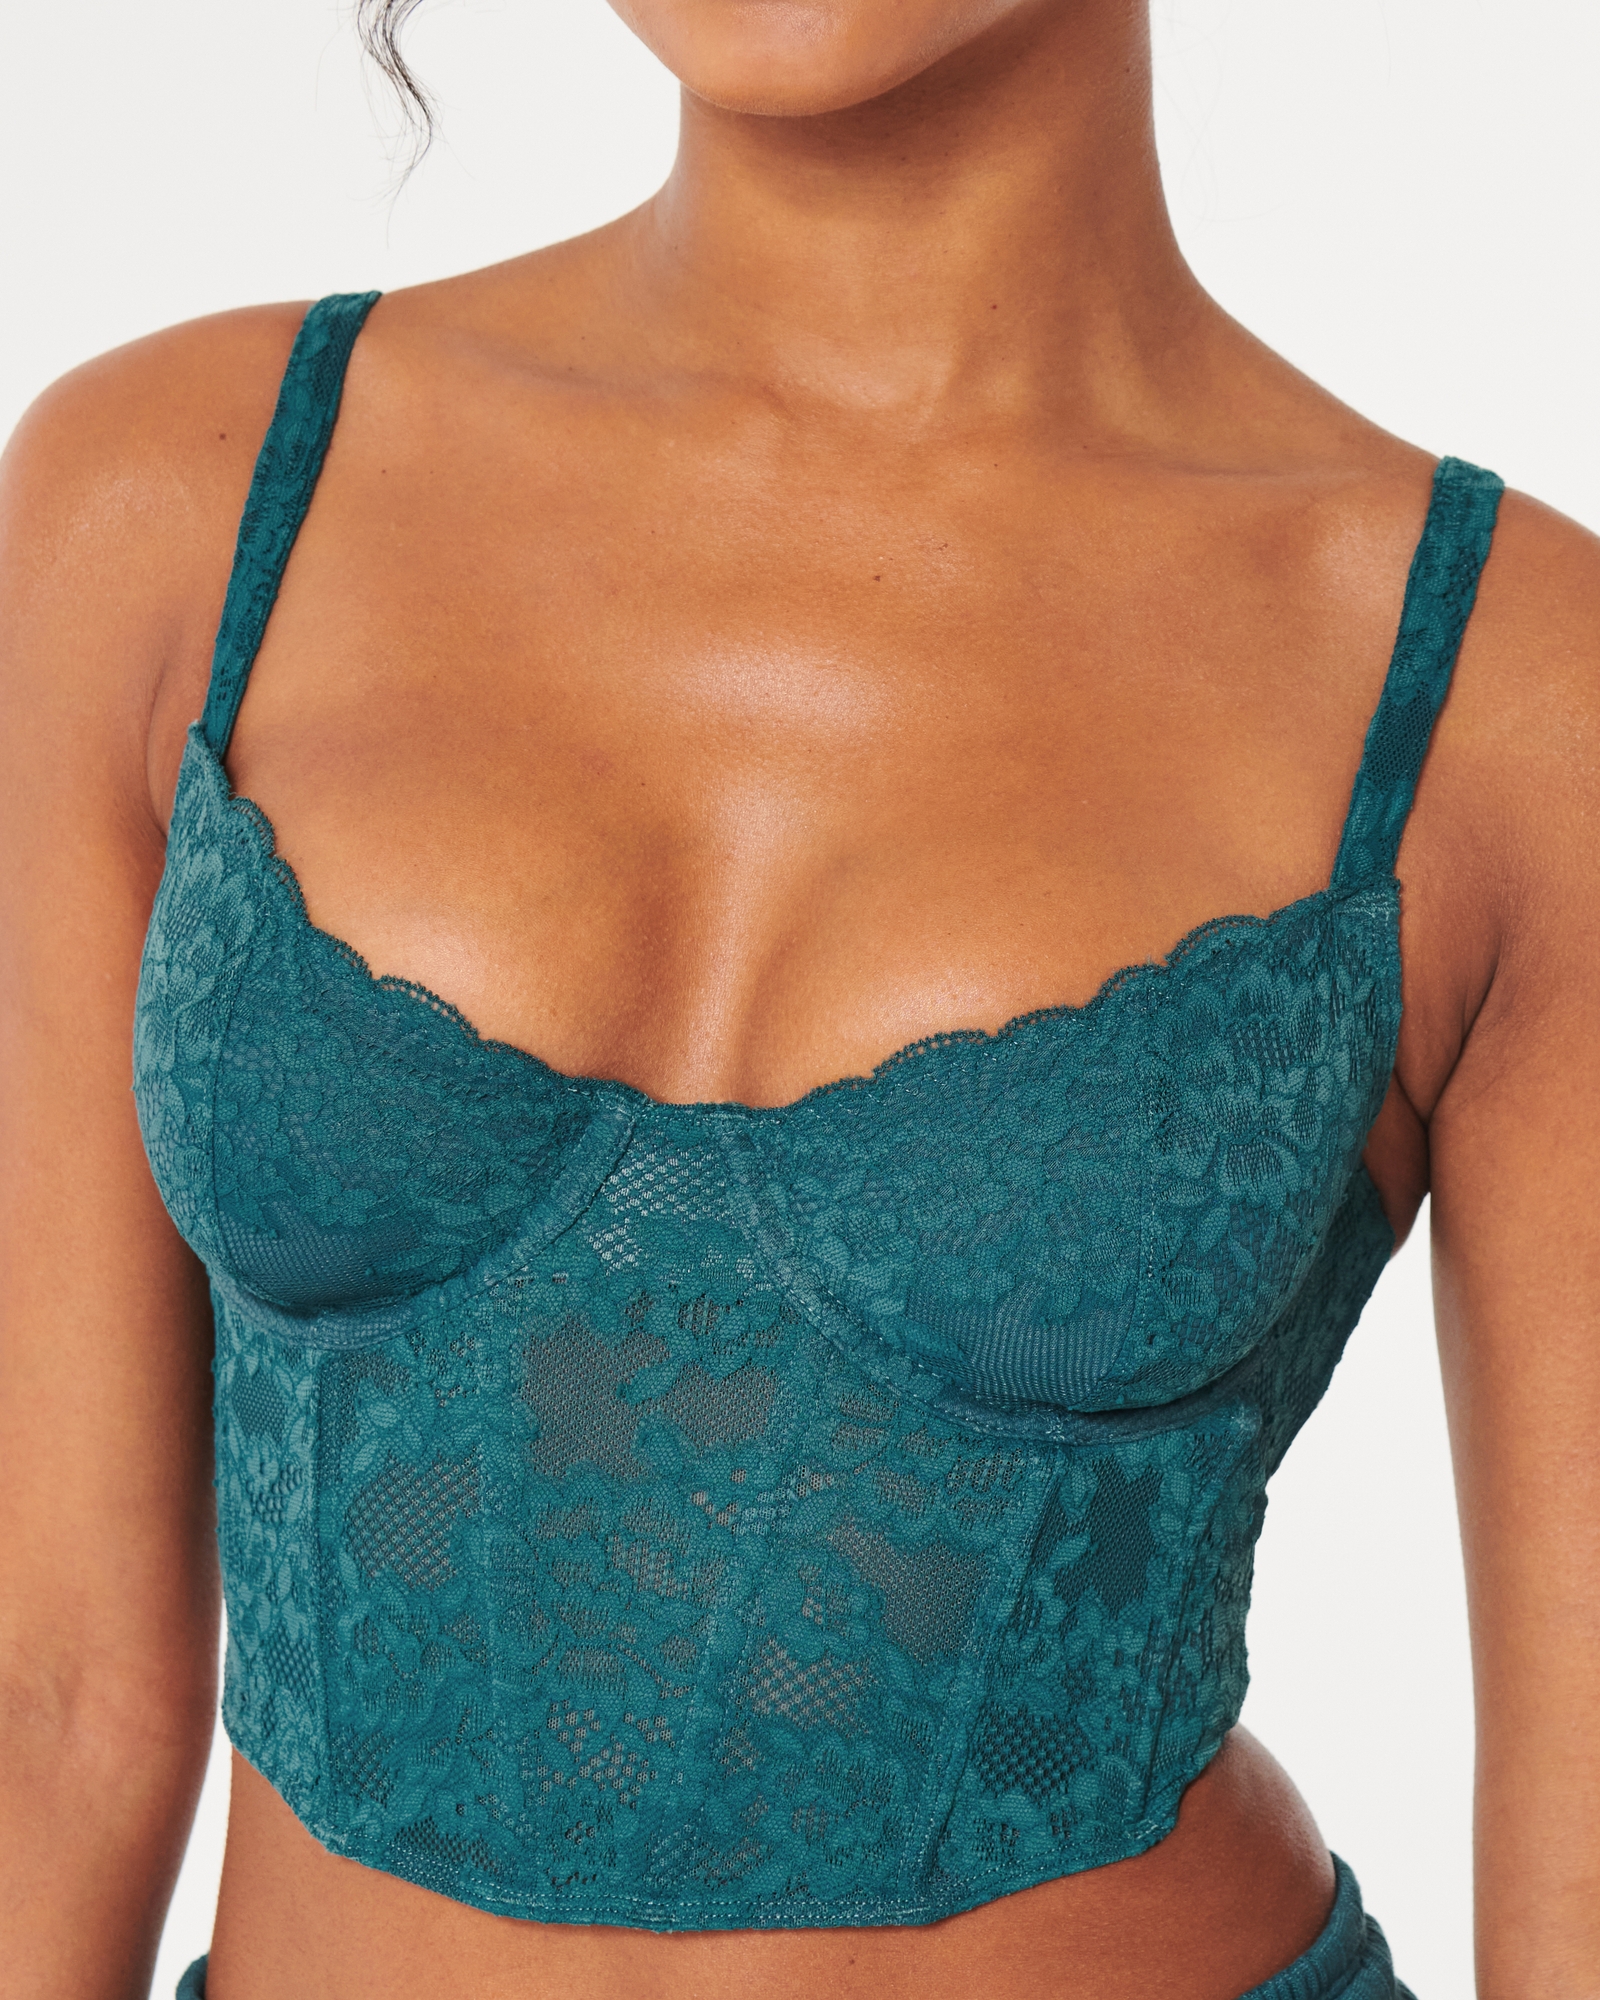 Gilly Hicks Green Lace Halter Bralette Size M - $10 (68% Off Retail) - From  Rebecca